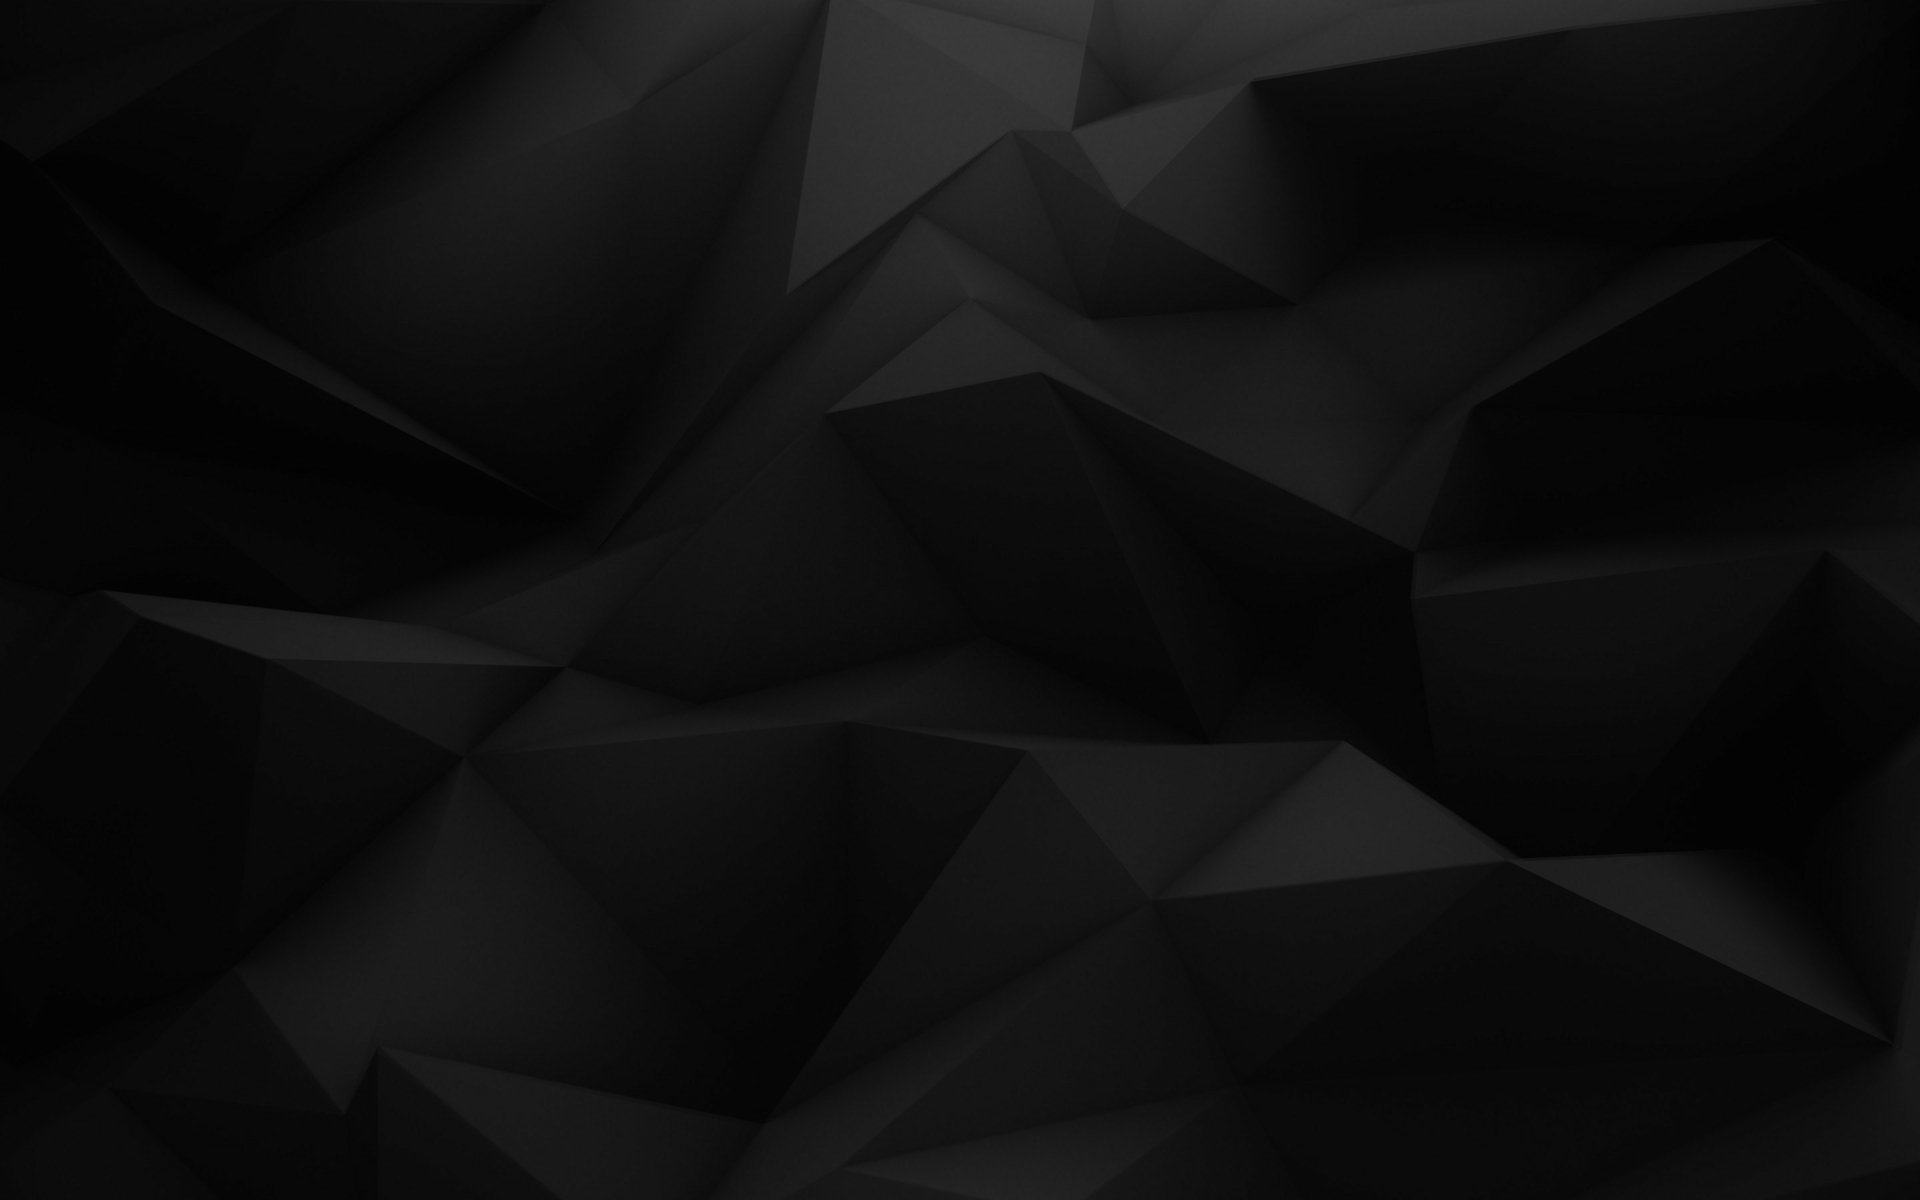 Abstract black triangular HD desktop wallpaper and background.